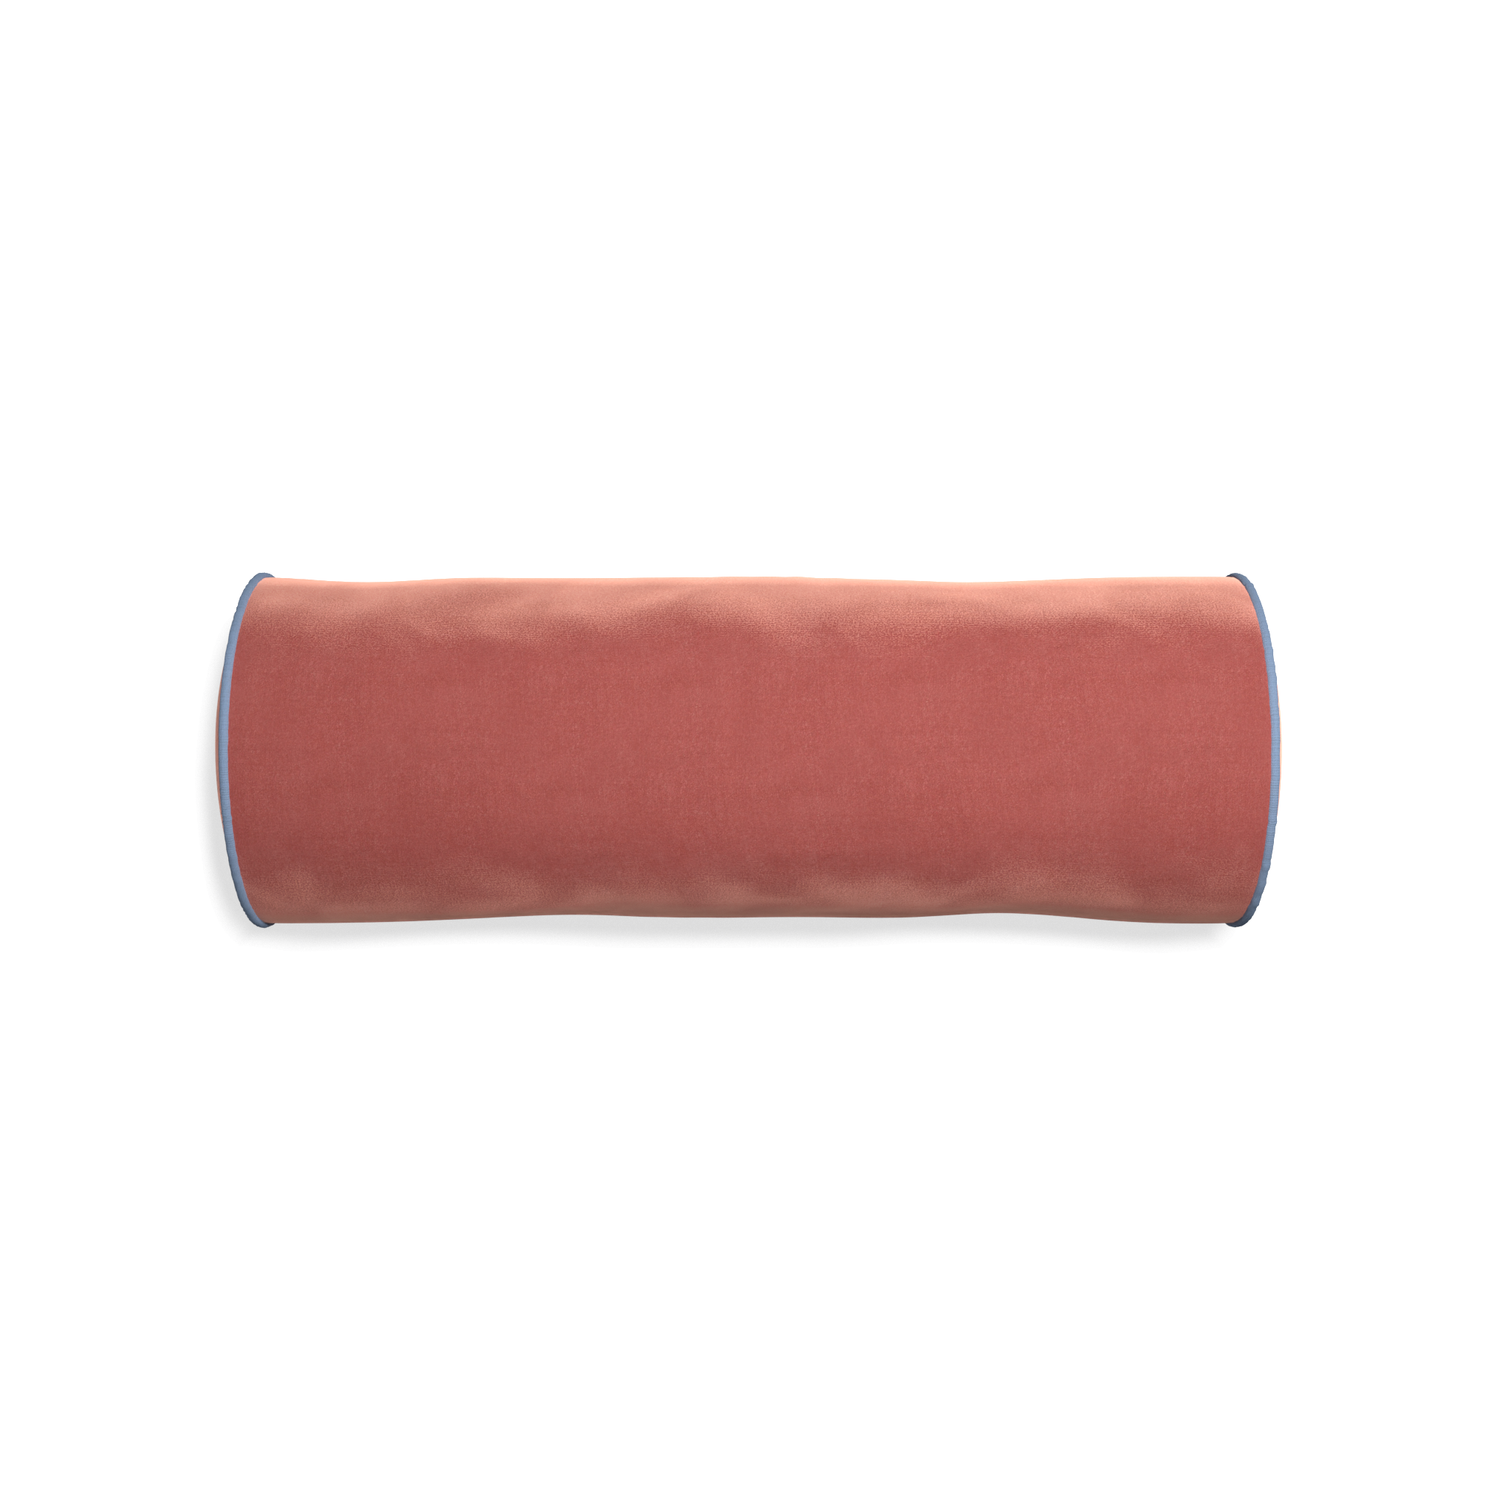 bolster coral velvet pillow with sky blue piping 